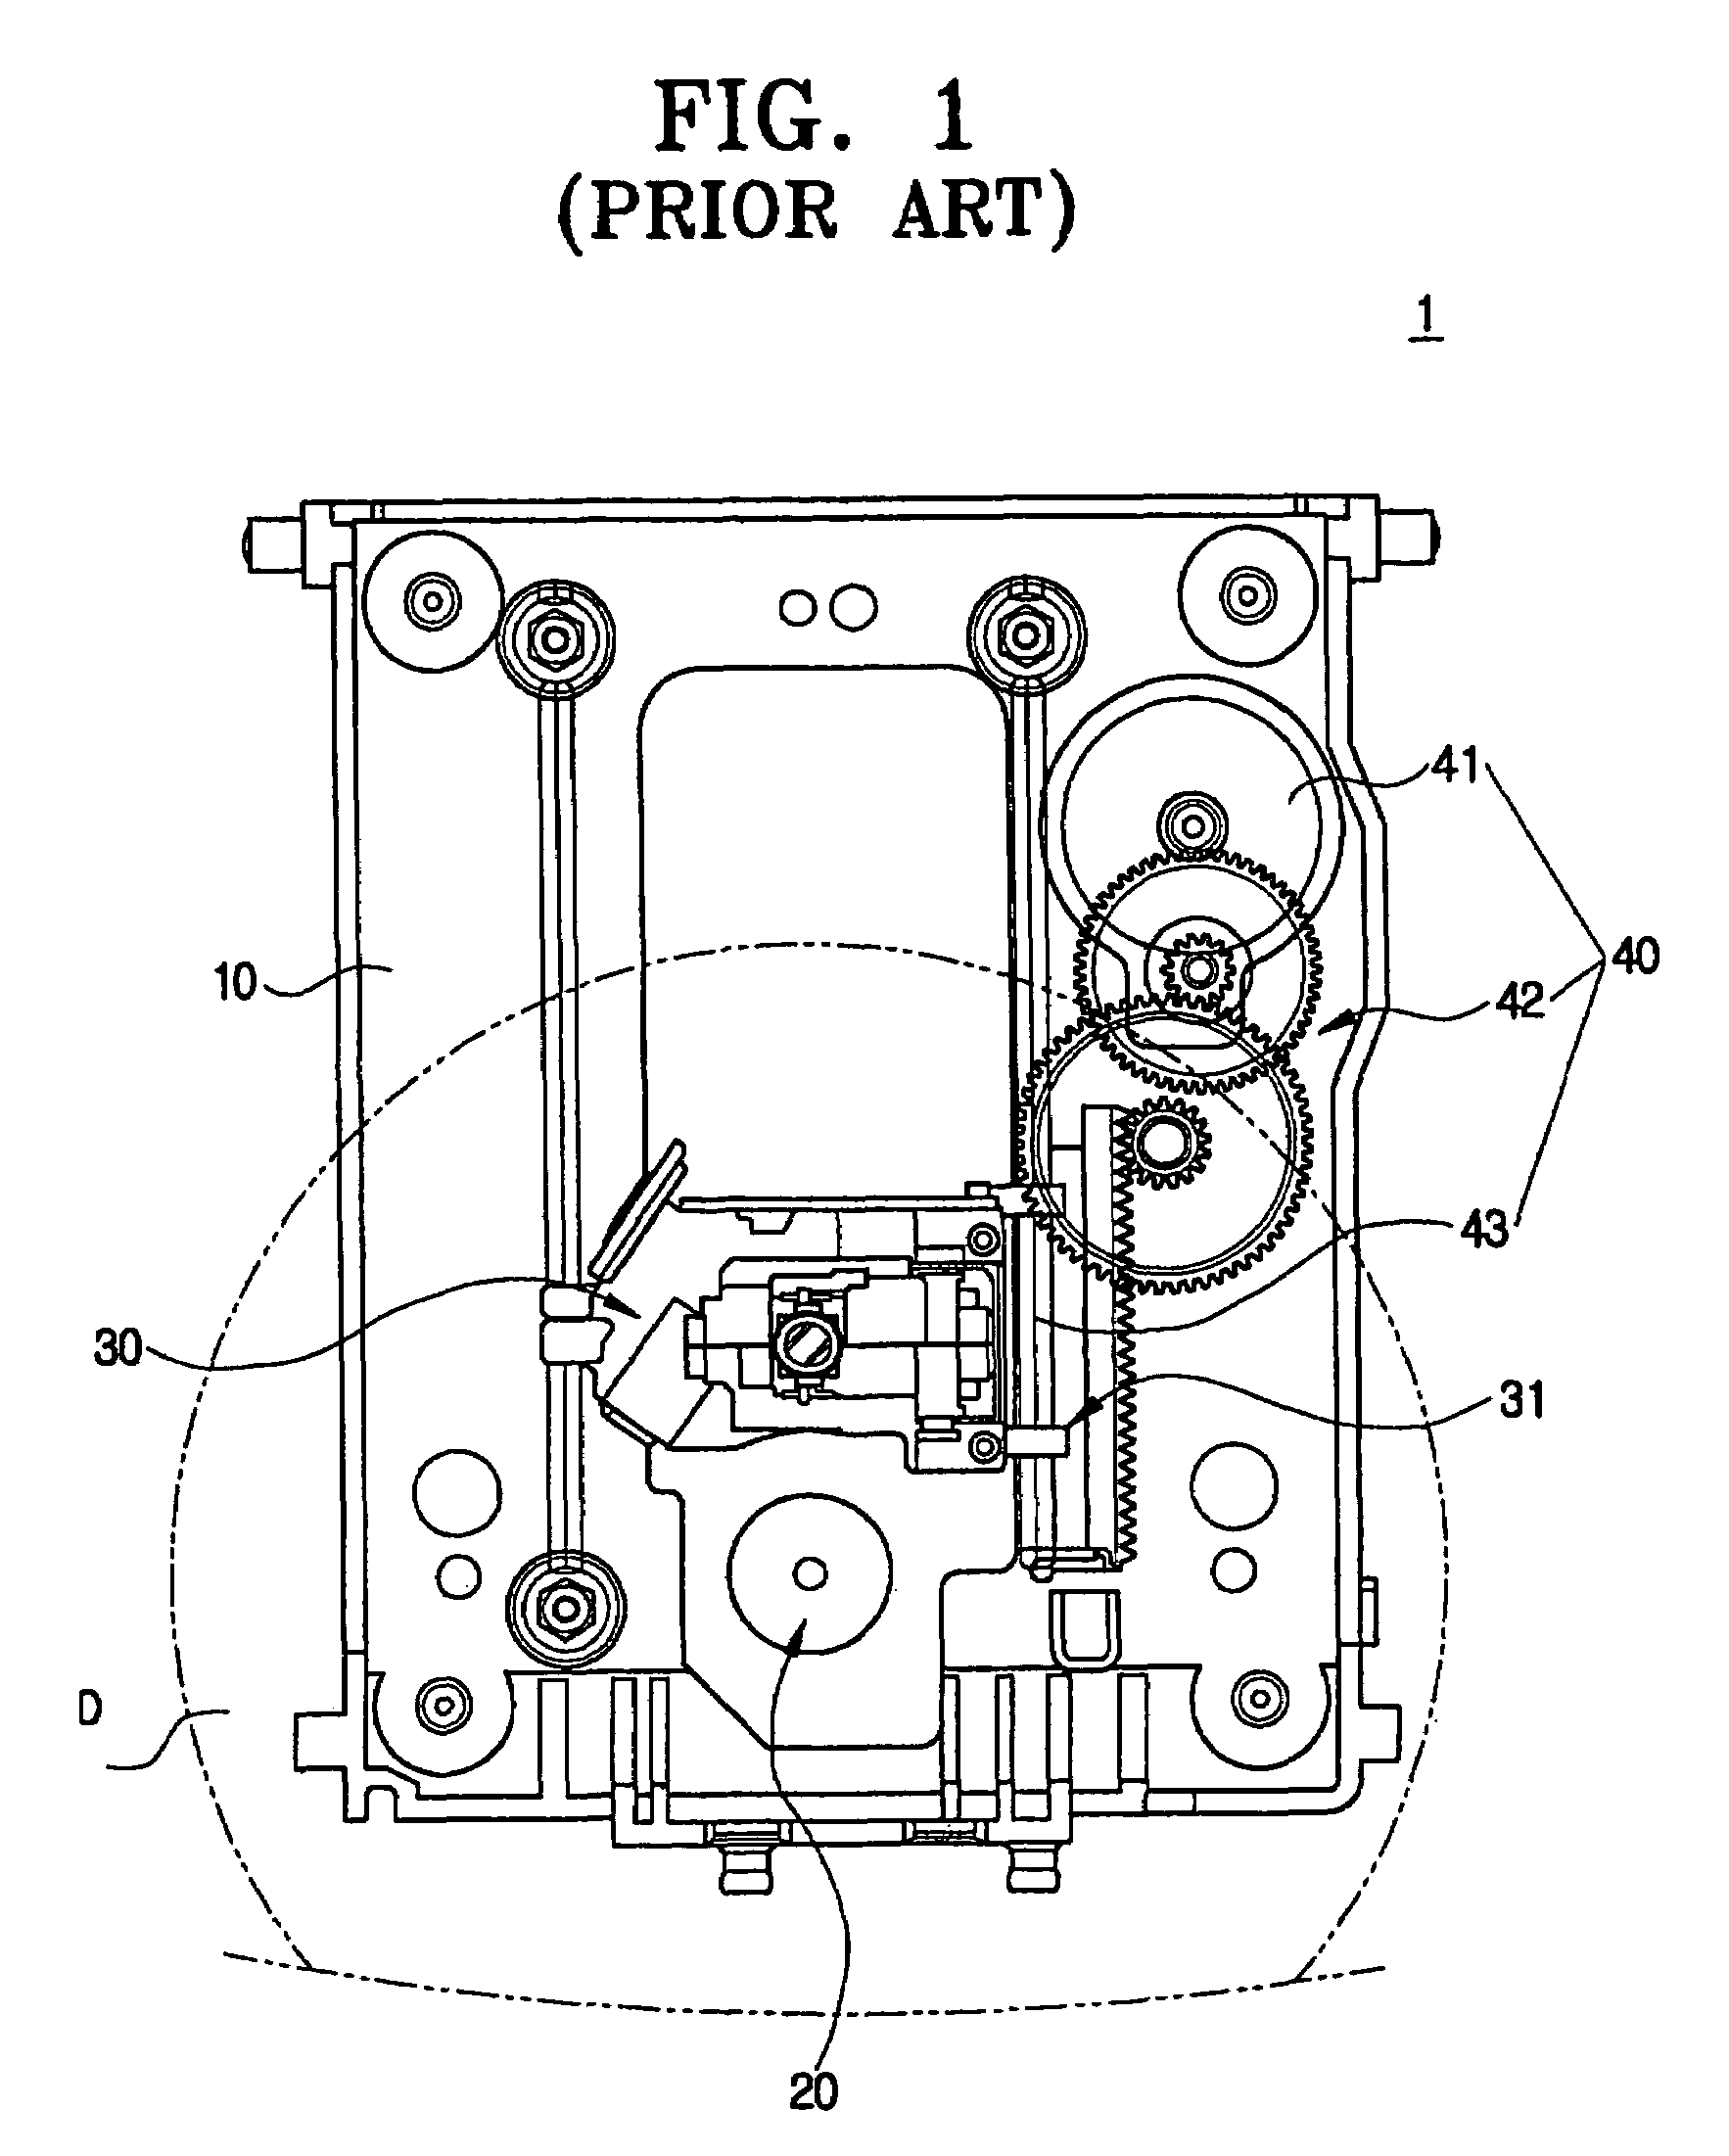 Optical pickup apparatus for optical disc drive having an improved receiving unit